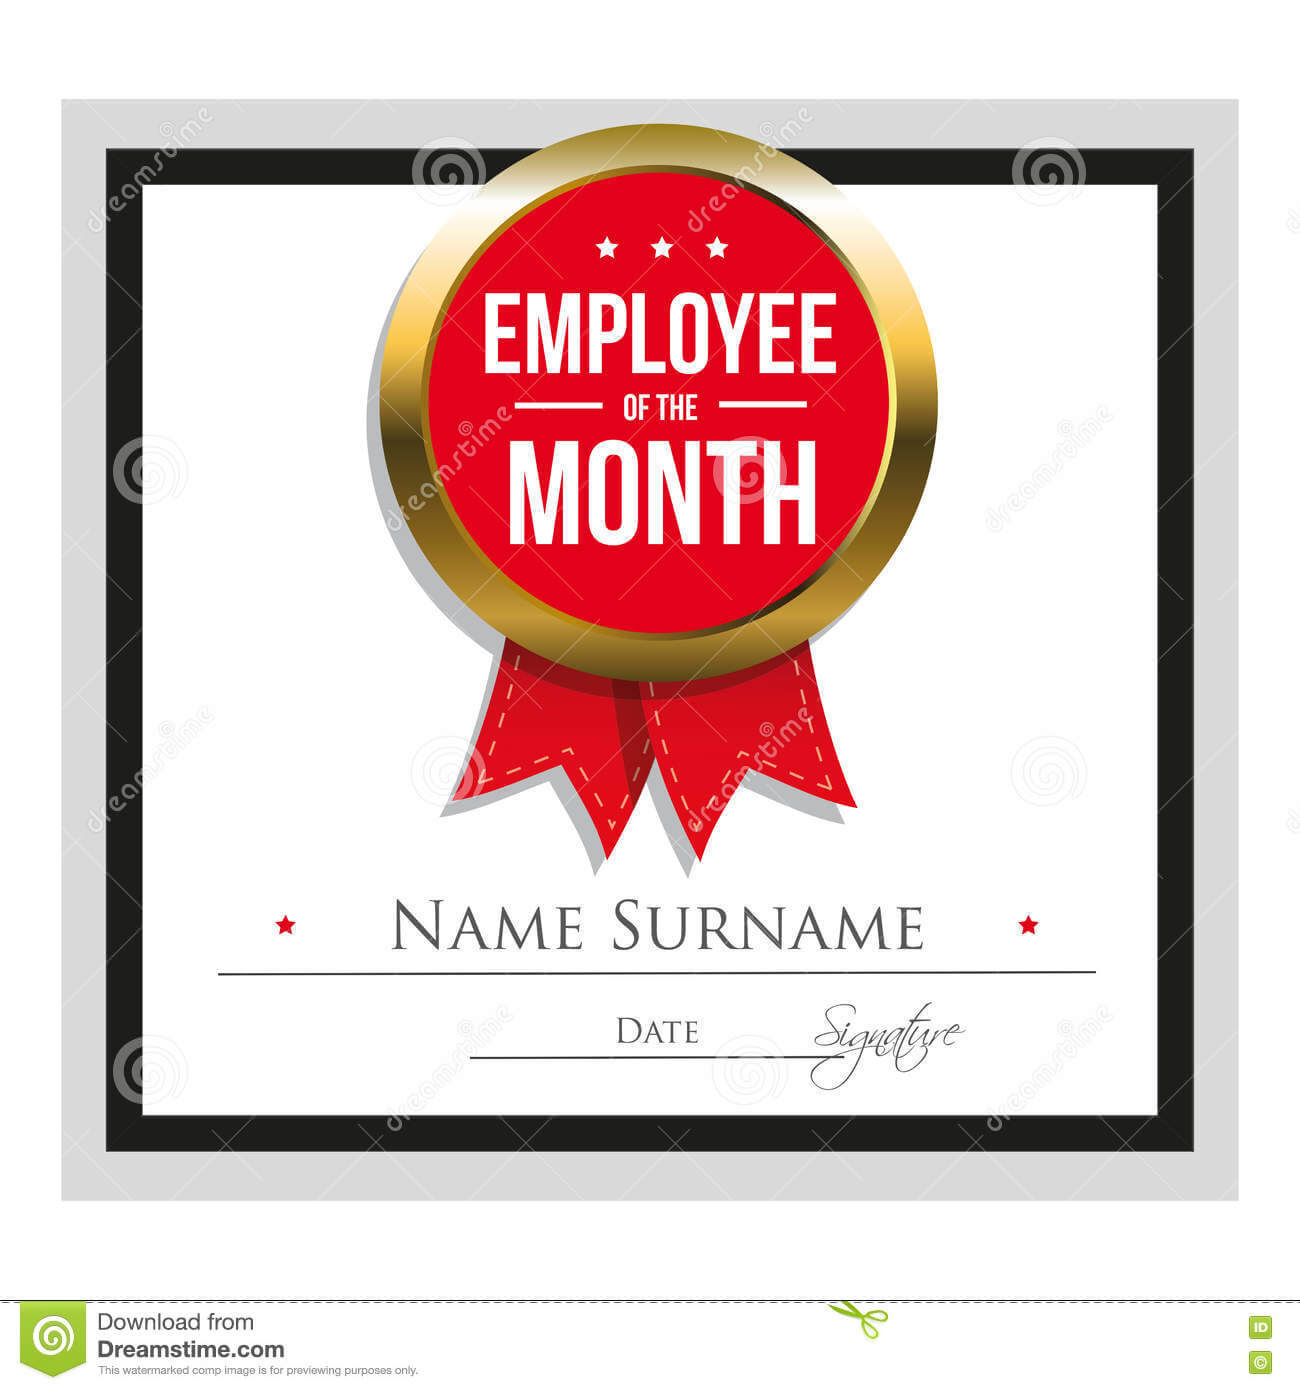 Employee Of The Month Certificate Template Stock Vector Intended For Employee Of The Month Certificate Template